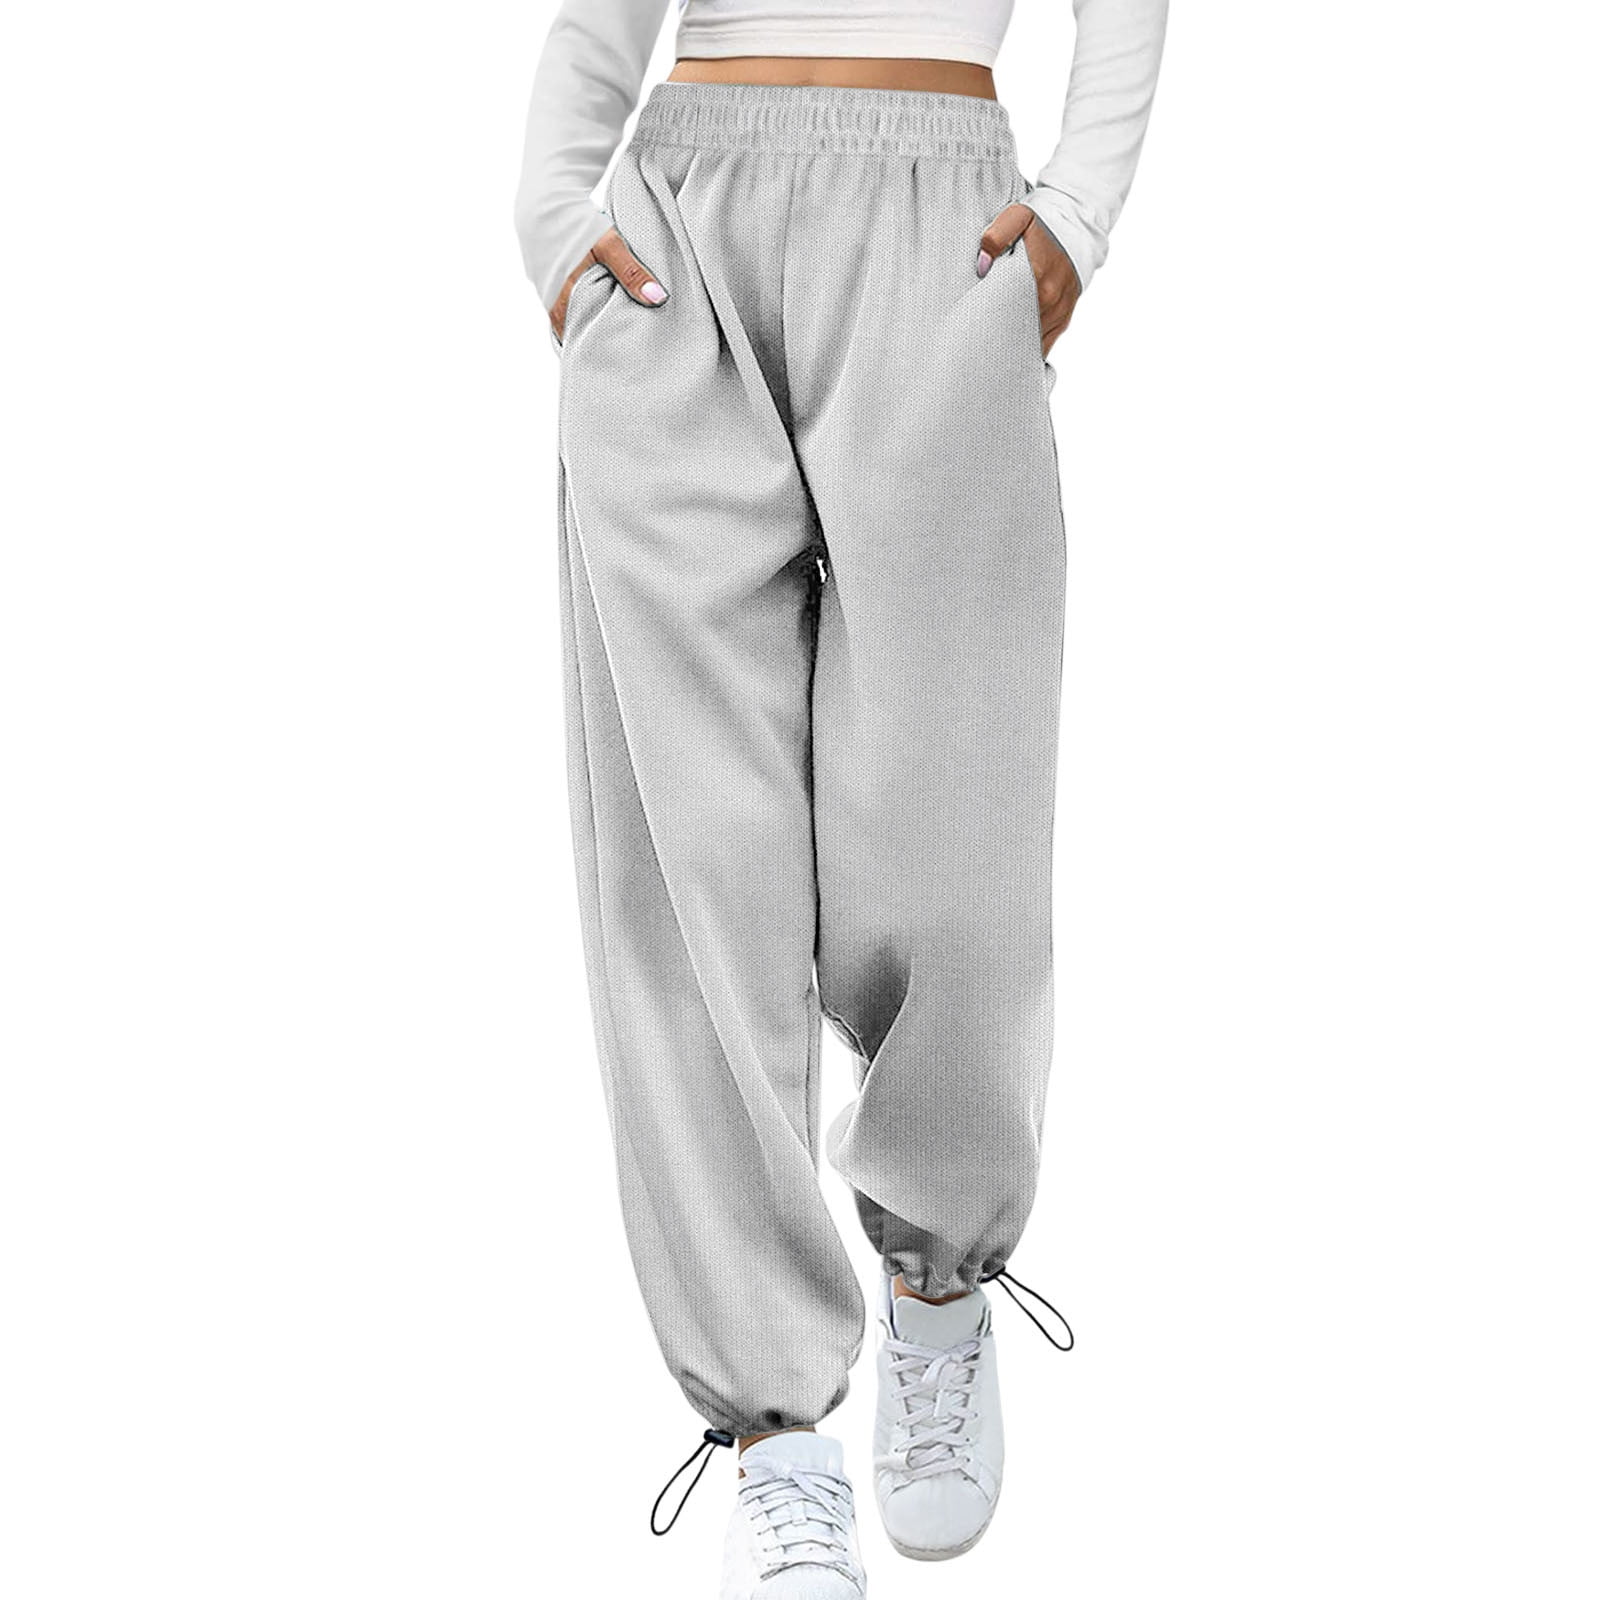 Buy Black Track Pants for Women by ALTHEORY SPORT Online | Ajio.com